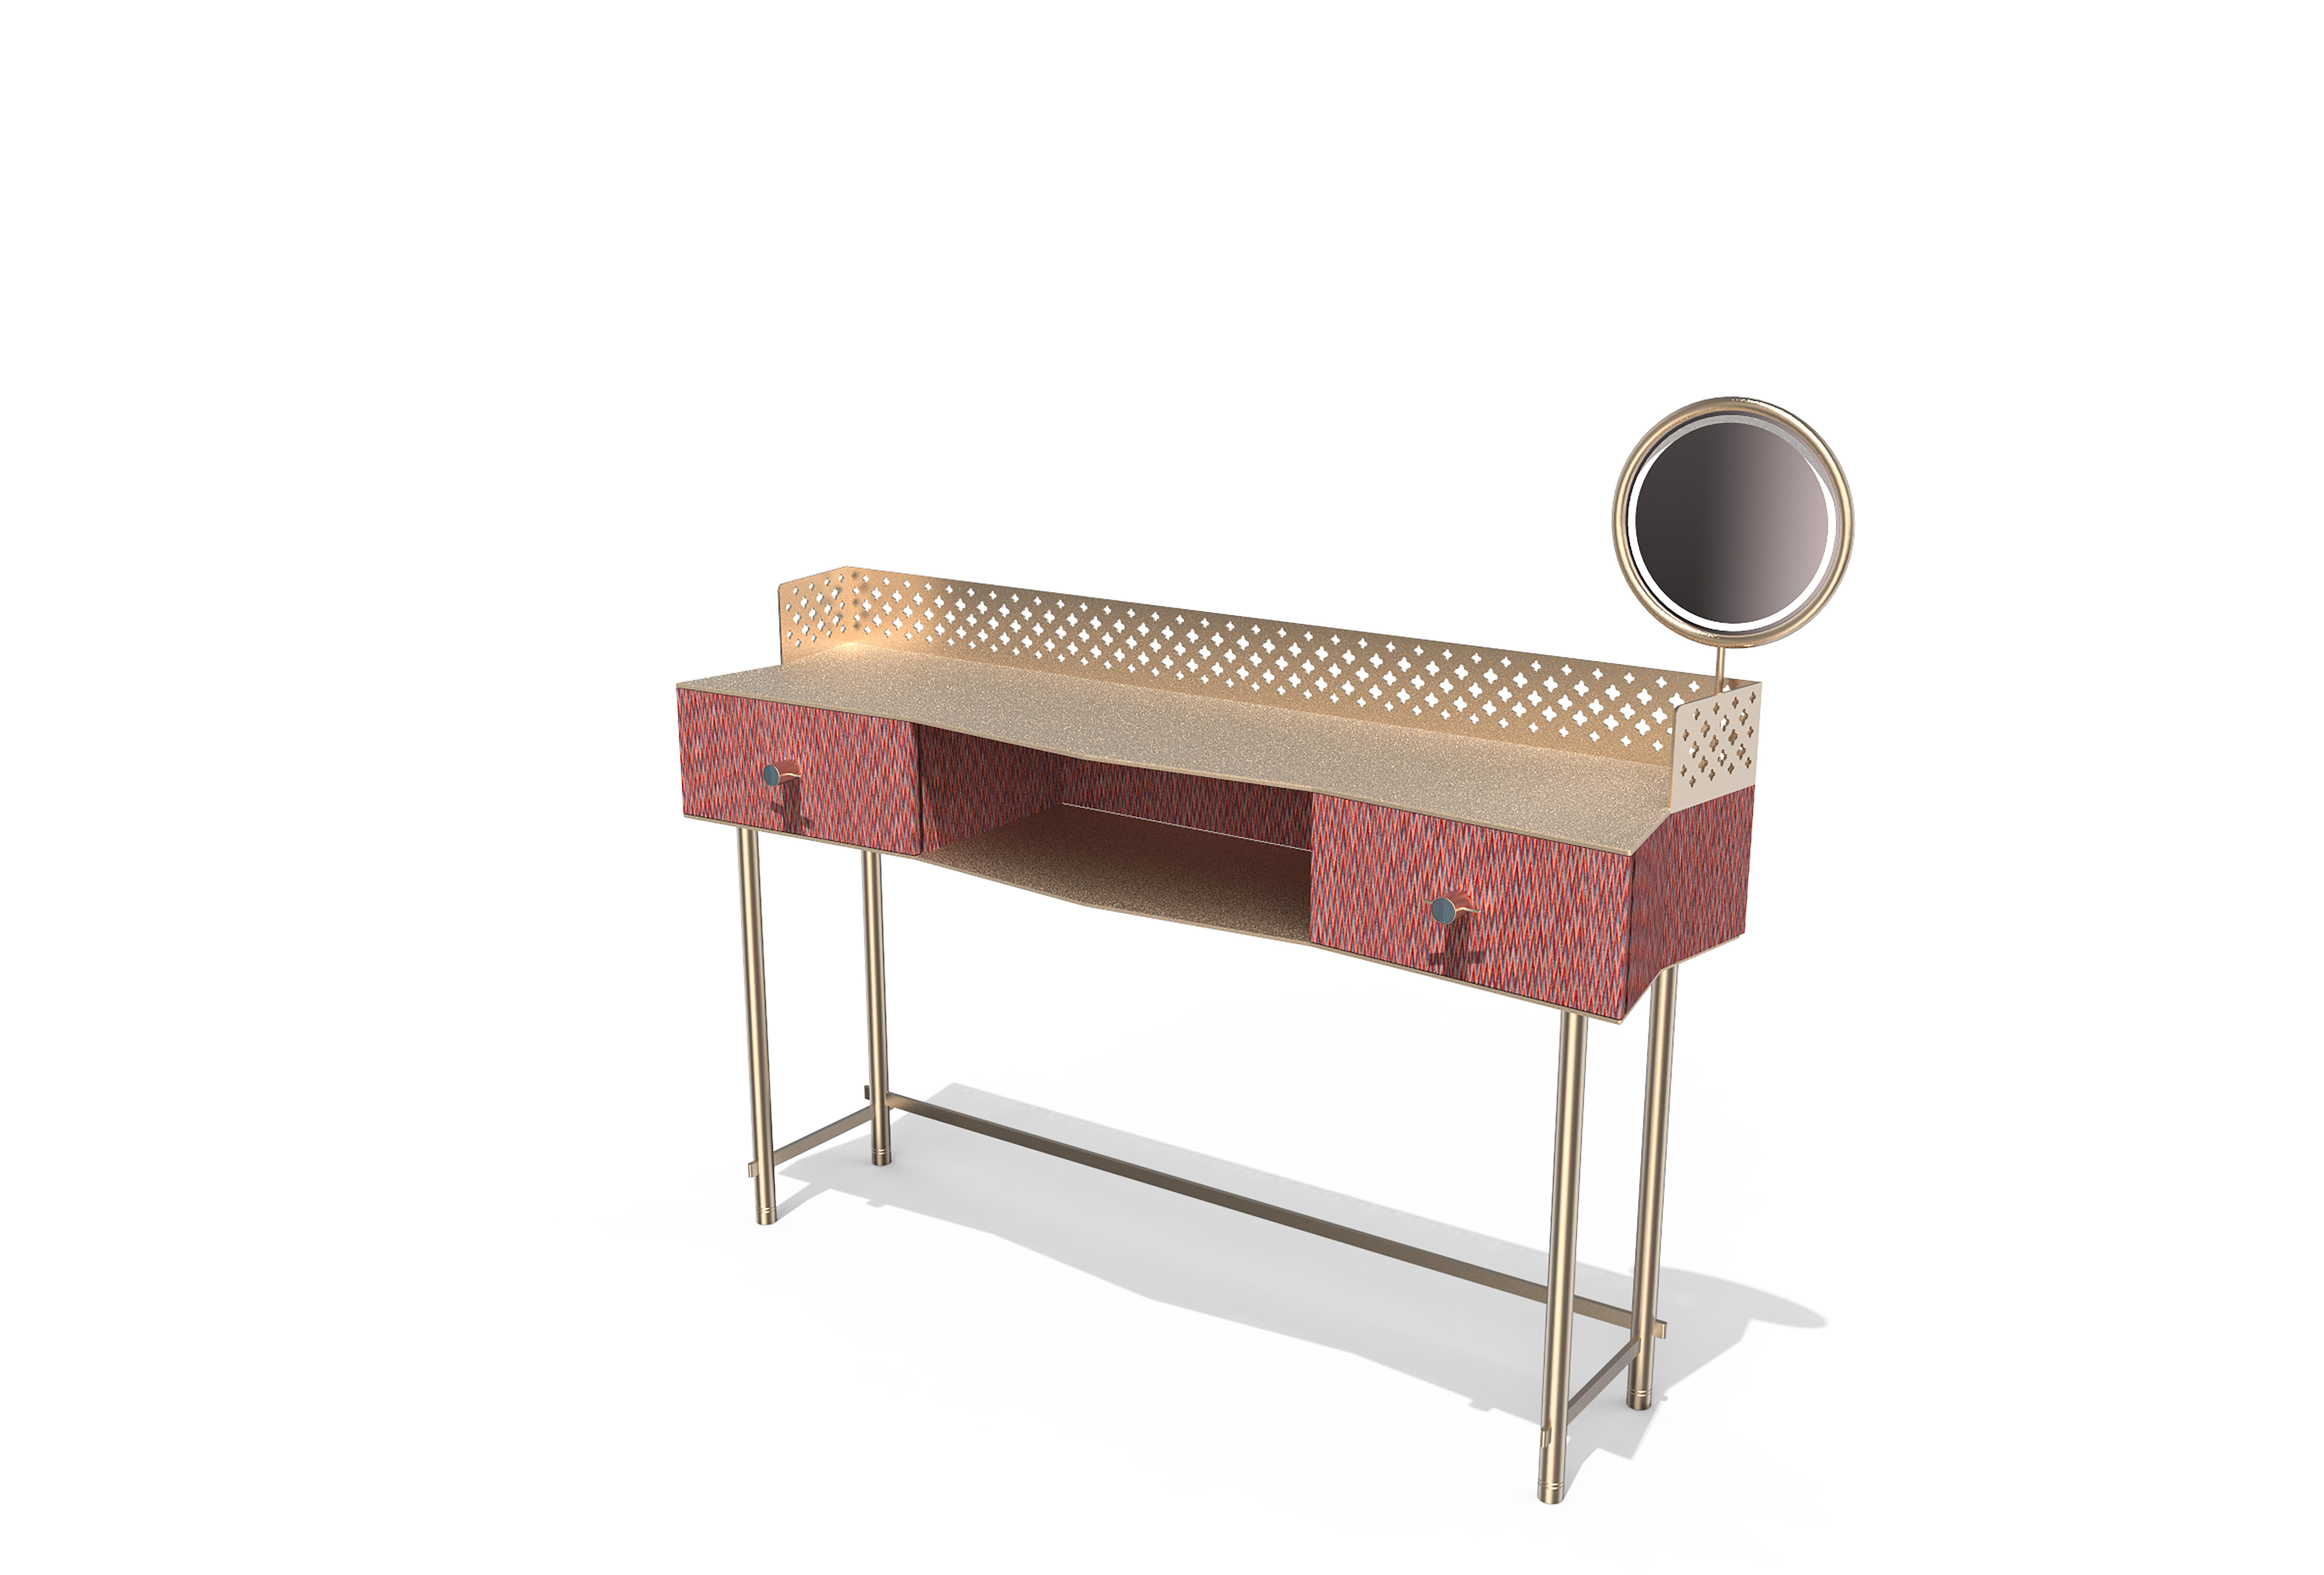 Make-up table in wood with fabric effect. Two drawers with soft-close slides. Precision calibrated metal handles with wood insert. Laser-cut interlocking tubular structure in metal and laser- cut metal sheet with flower motifs finished manually.